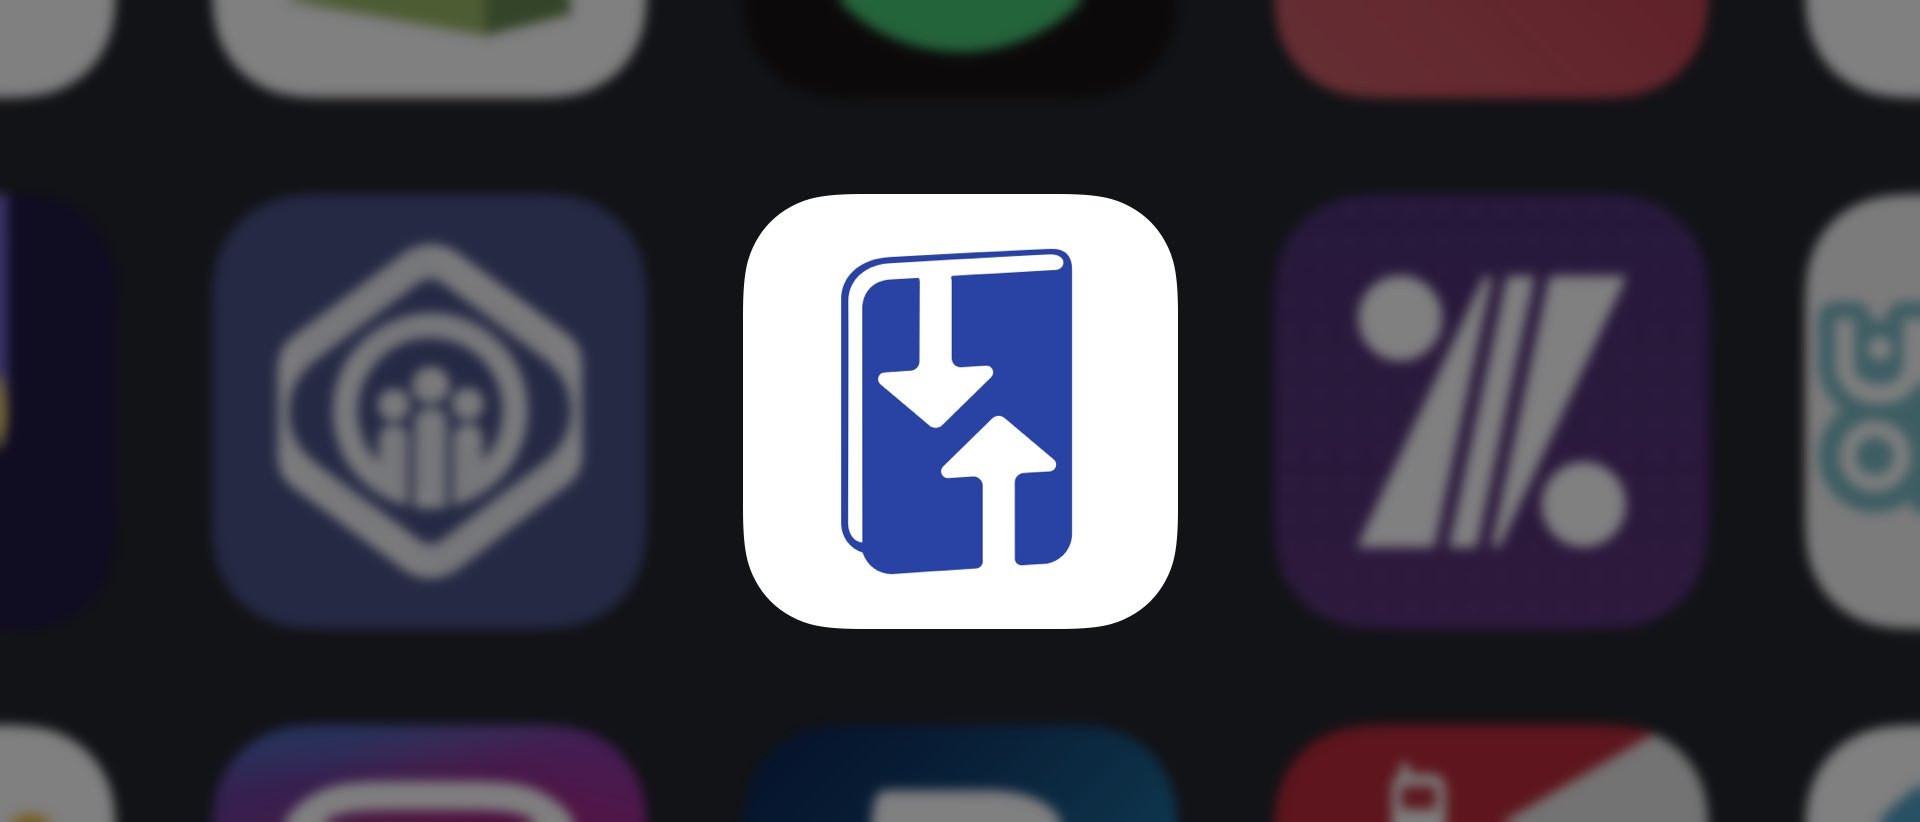 Ragham app icon centered among other apps